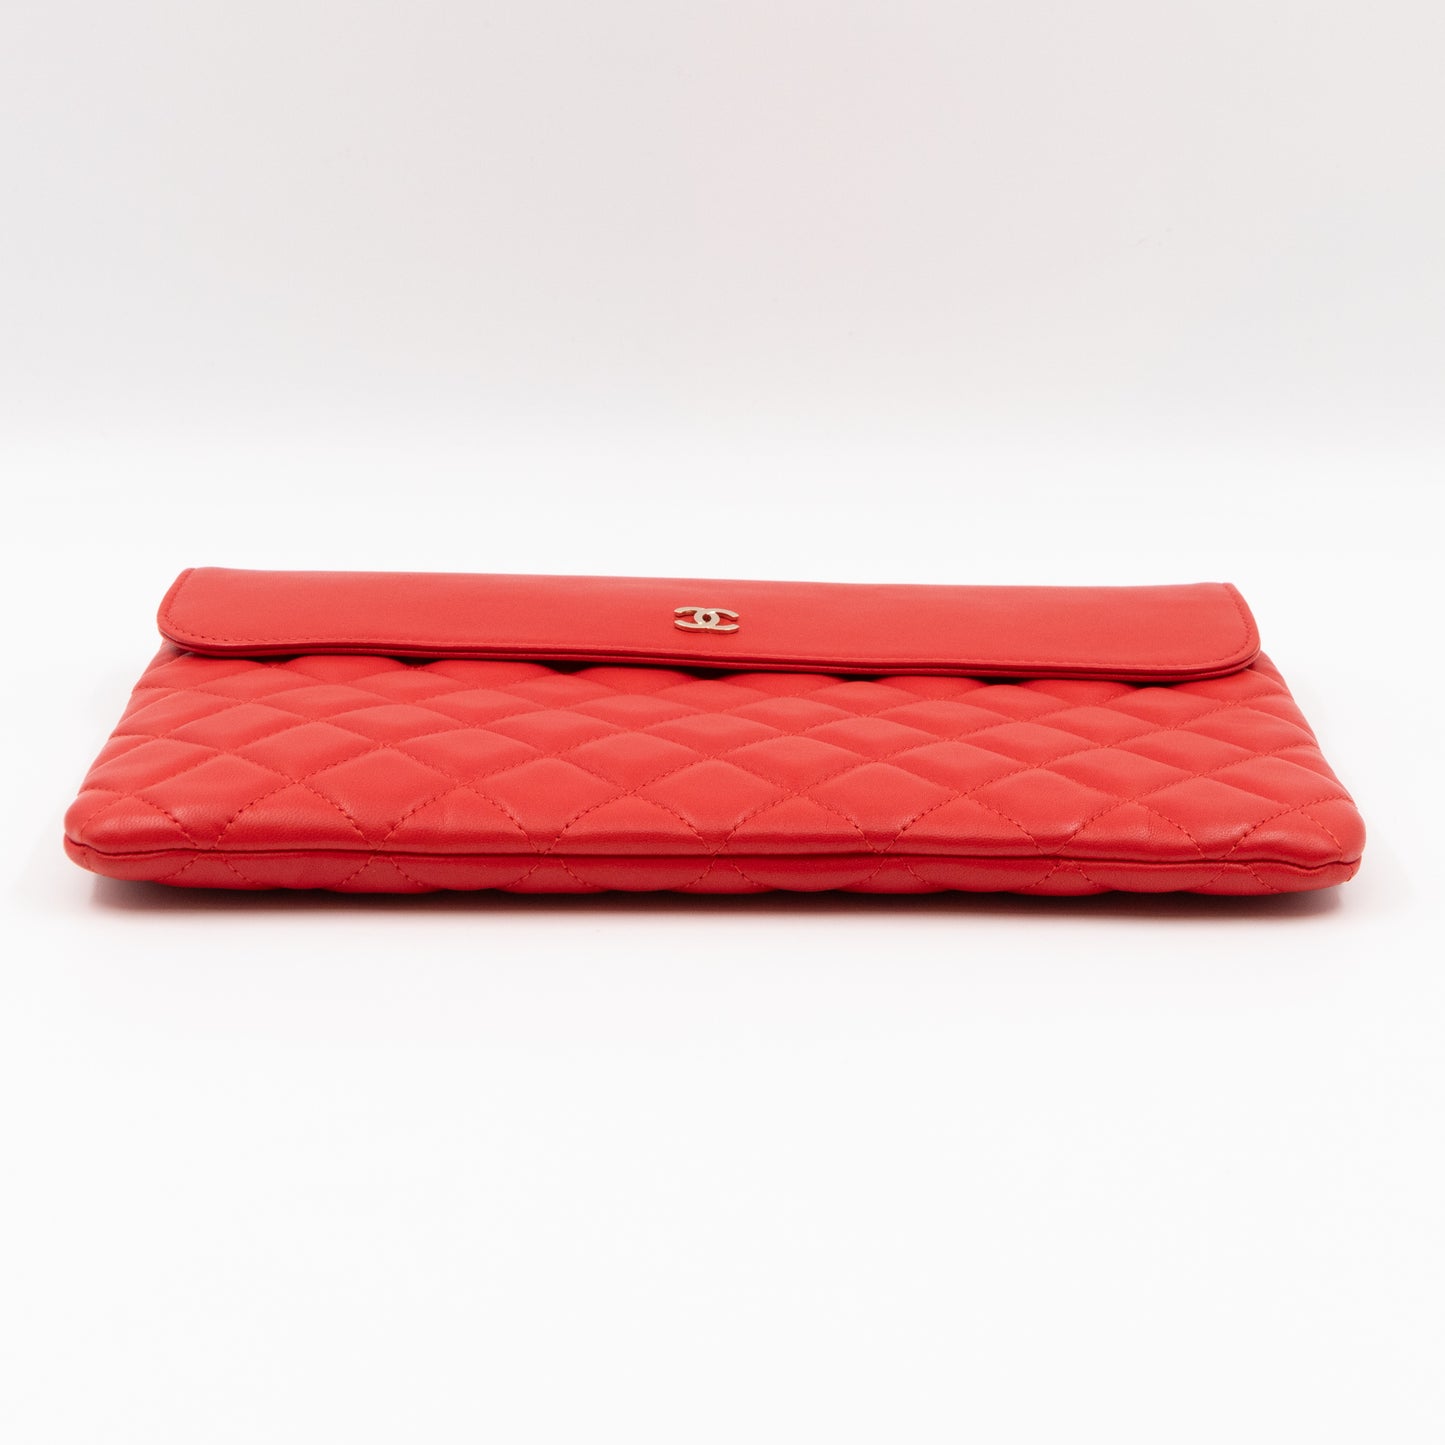 Flap O Case Red Leather